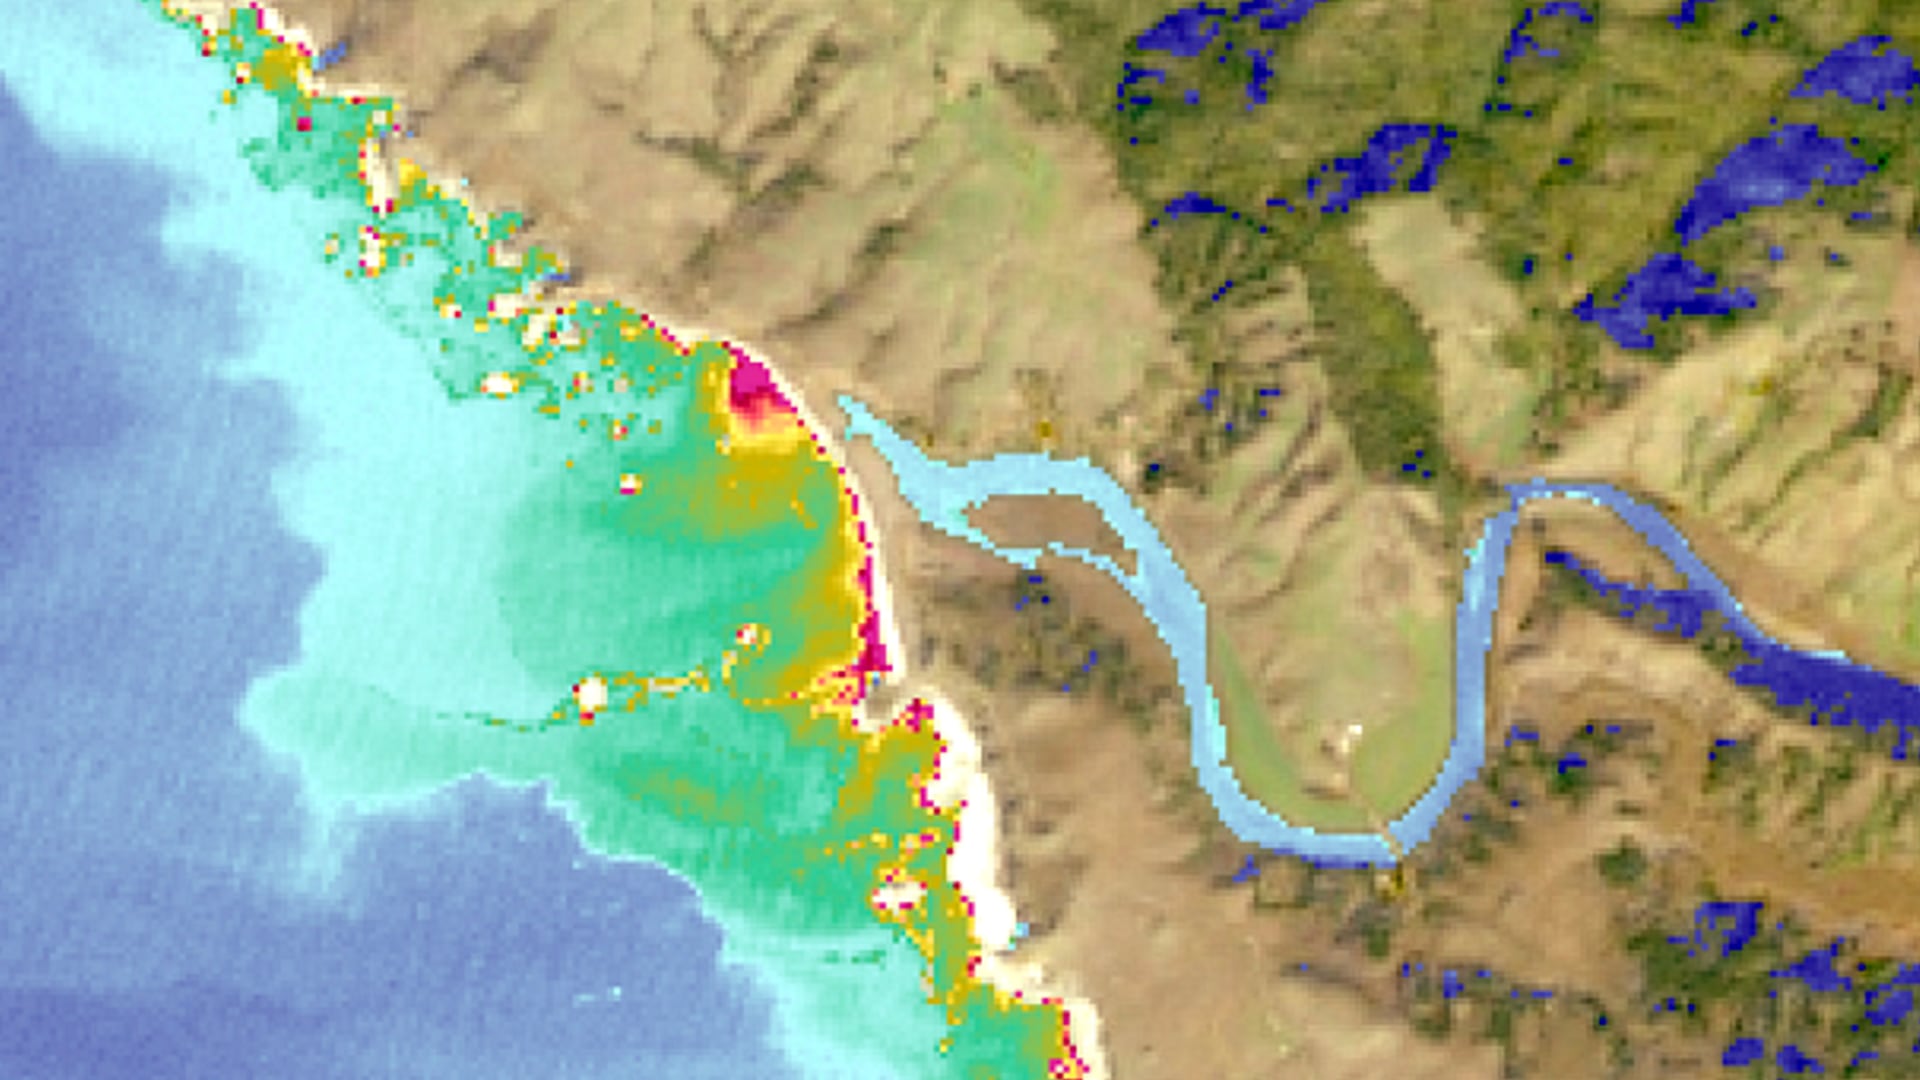 Turbidity calculated from Landsat 8 OLI imagery taken 01/23/2021 over Russian River, California. A turbidity algorithm was applied to visualize water quality and mask out land. In areas of water, red indicates high turbidity and blue indicates low turbidity. Land is displayed with a true color band combination (4, 3, 2) where dark blue indicates shadow. As turbidity can indicate poor water quality, visualization informs conservation agencies on estuary conditions.Keywords: Image created by Roger Ly. Keywords: turbidity, water quality monitoring, California, estuary